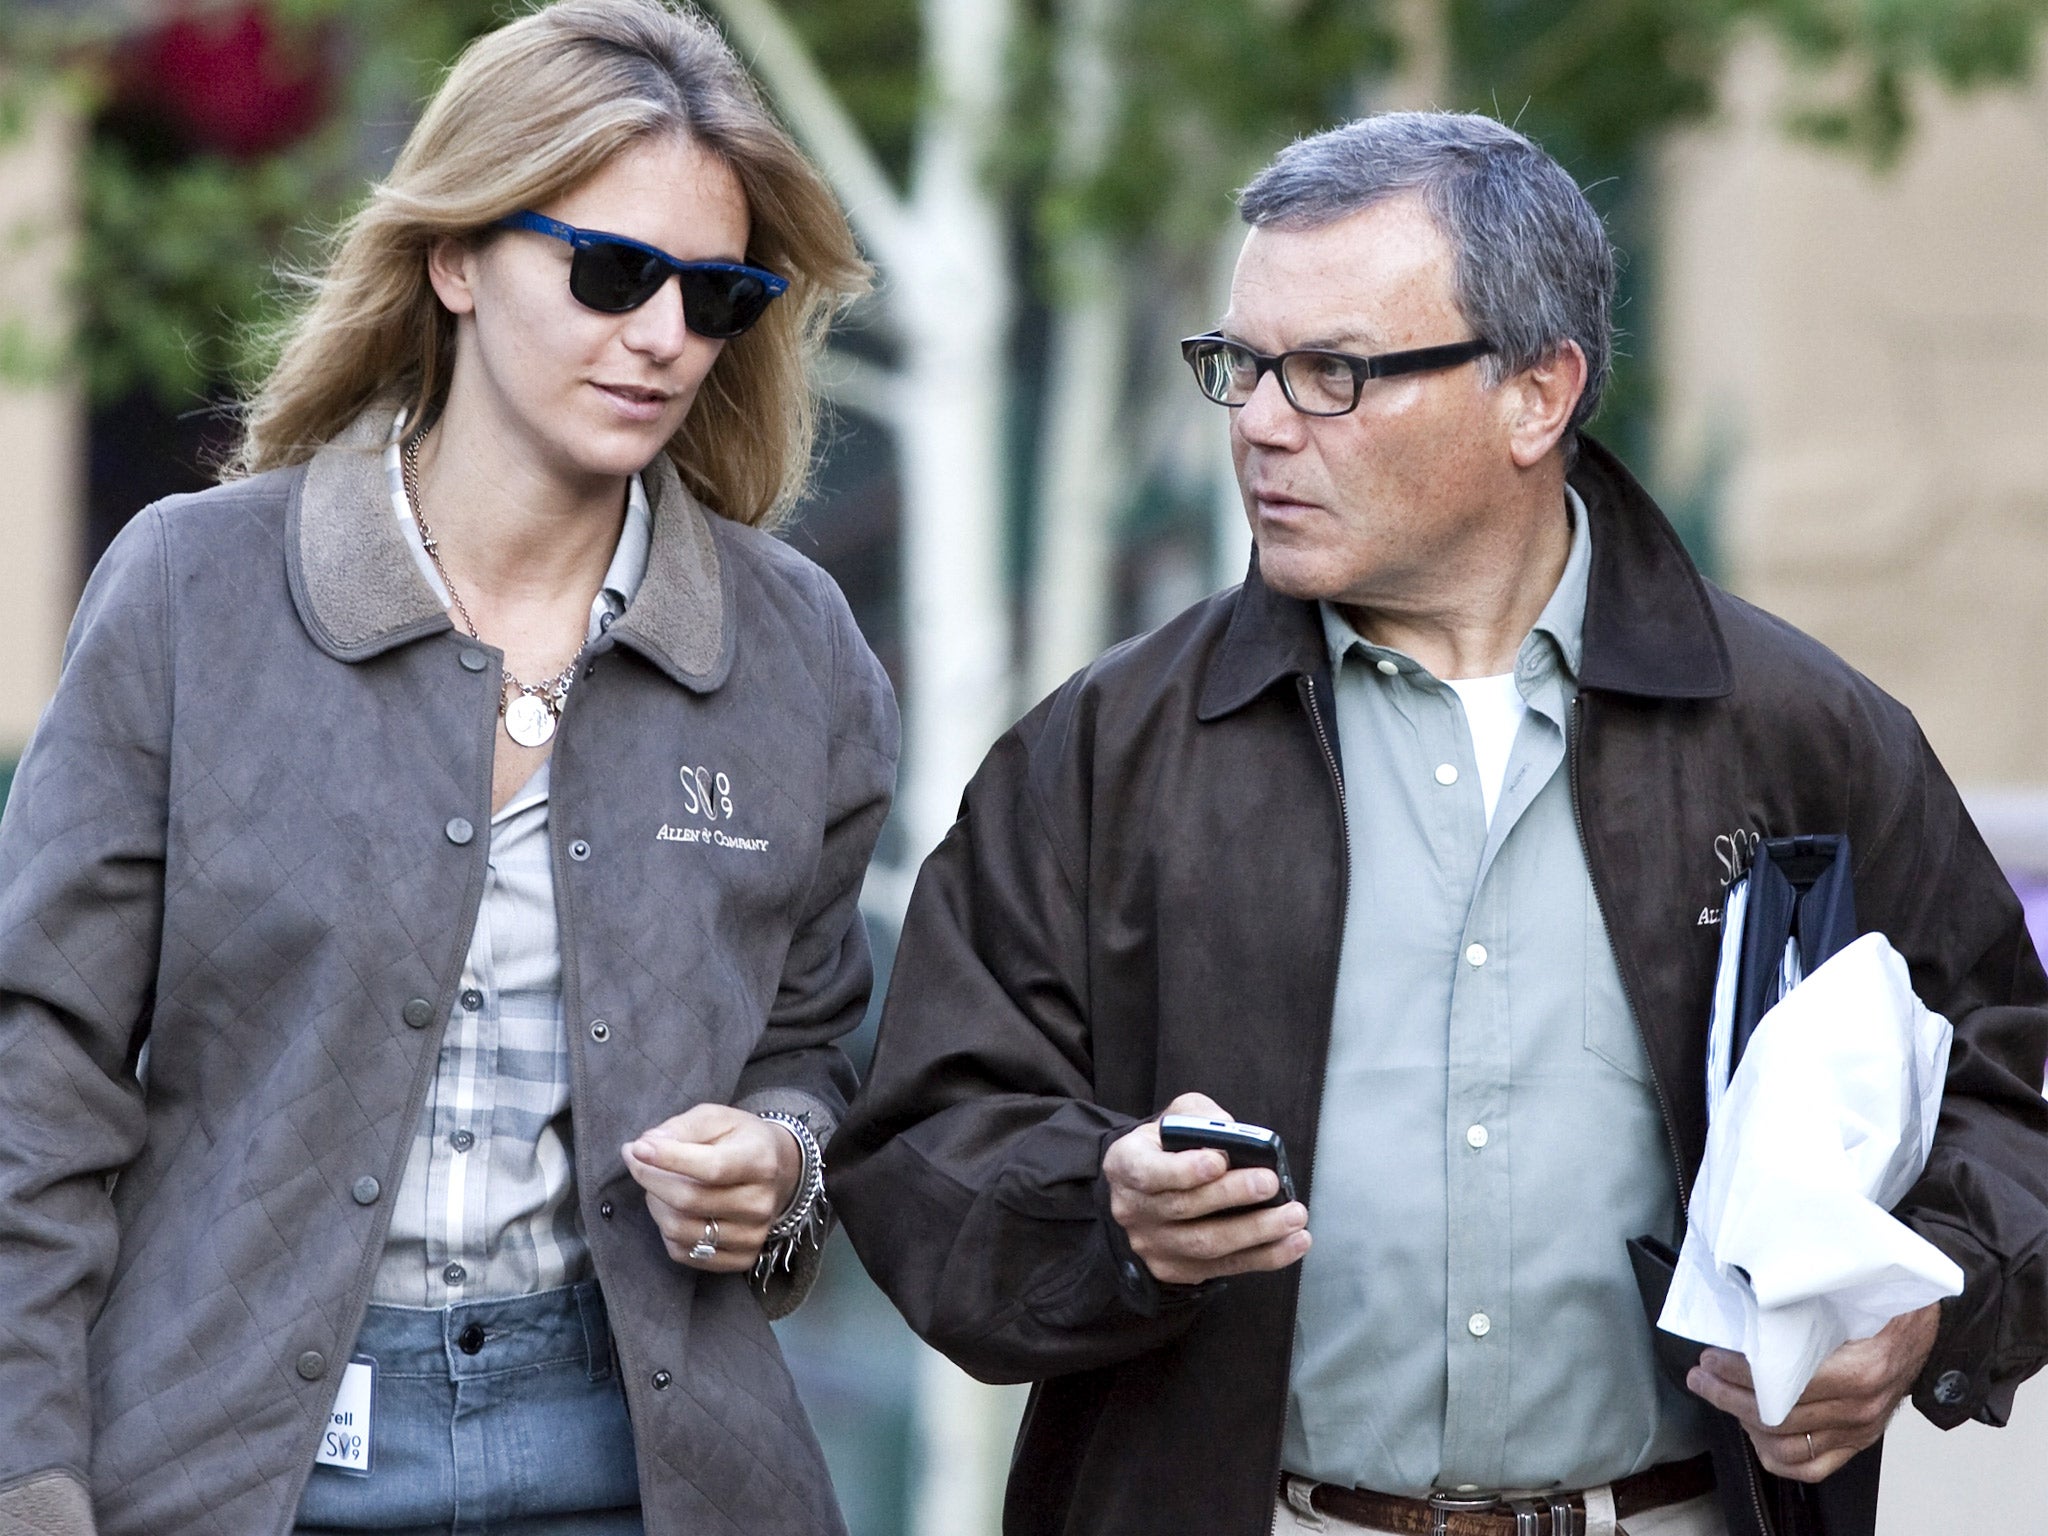 Sir Martin Sorrell pictured with his wife, Cristiana Falcone Sorrell